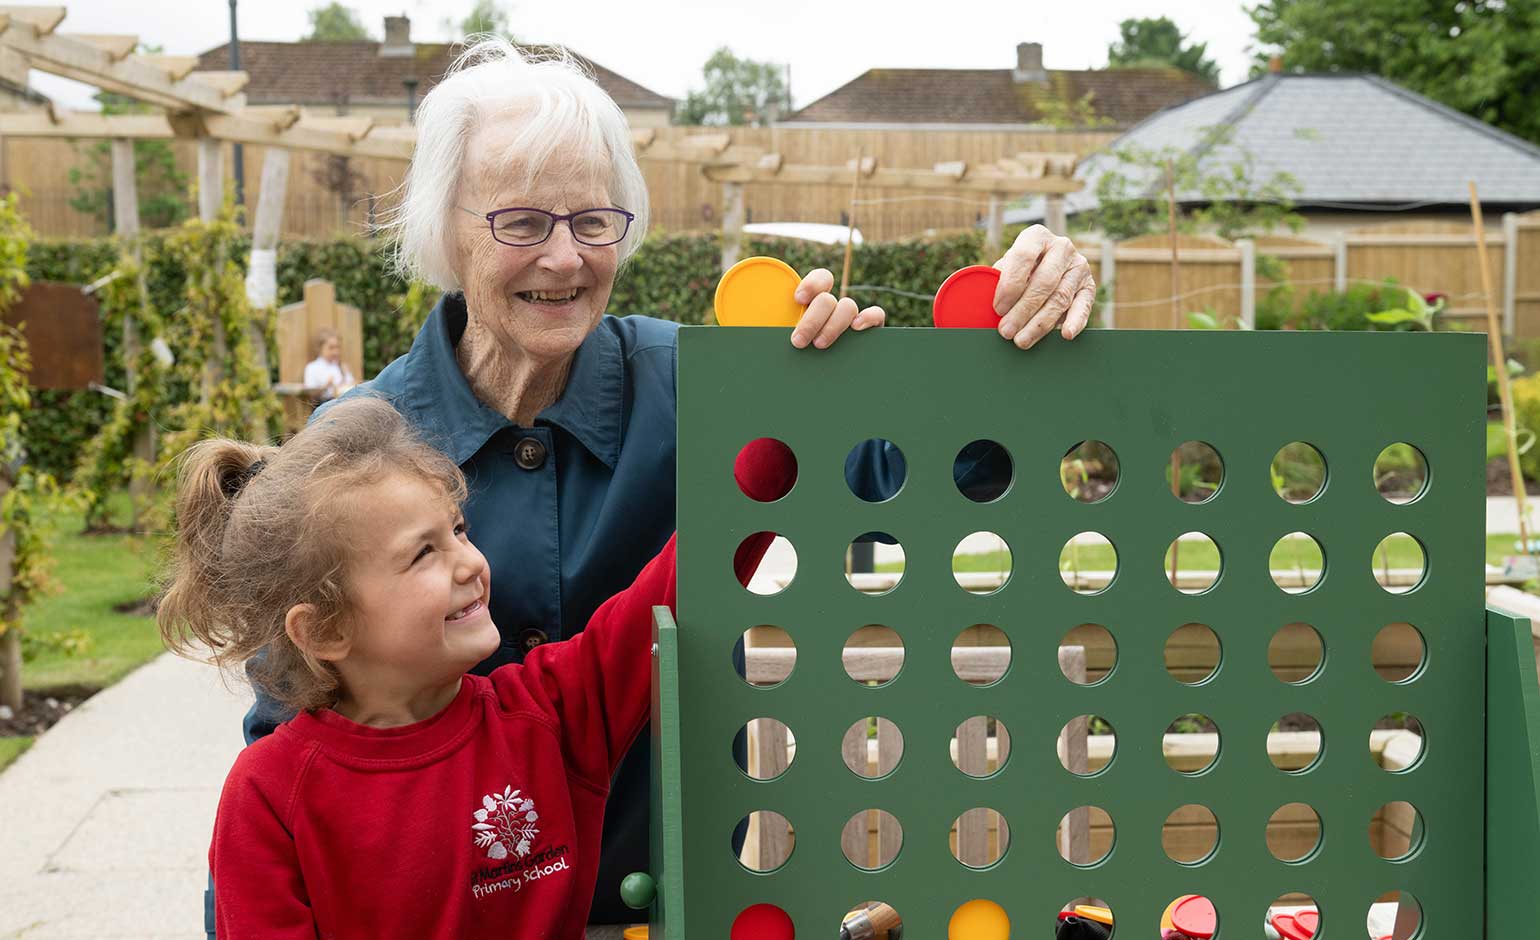 Generations come together at country’s first care home play garden